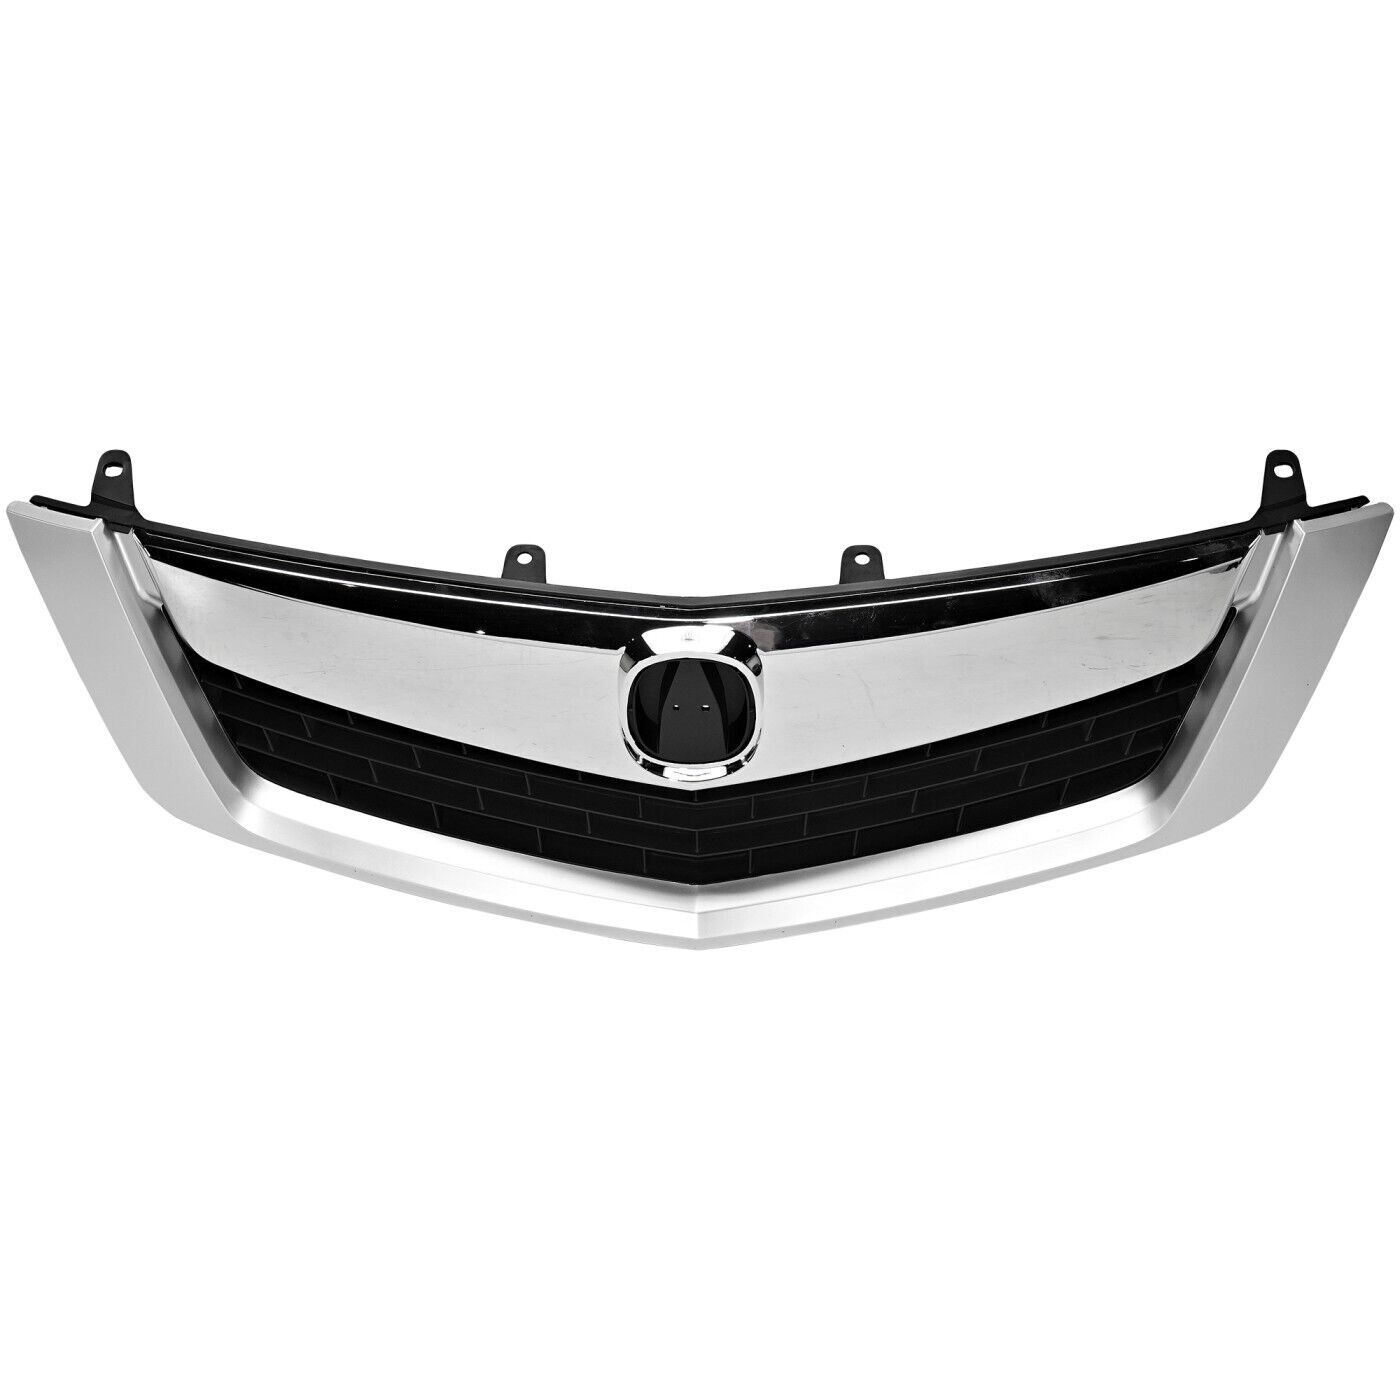 Grille Assembly For 2009-2010 Acura TSX 71121TL2A00